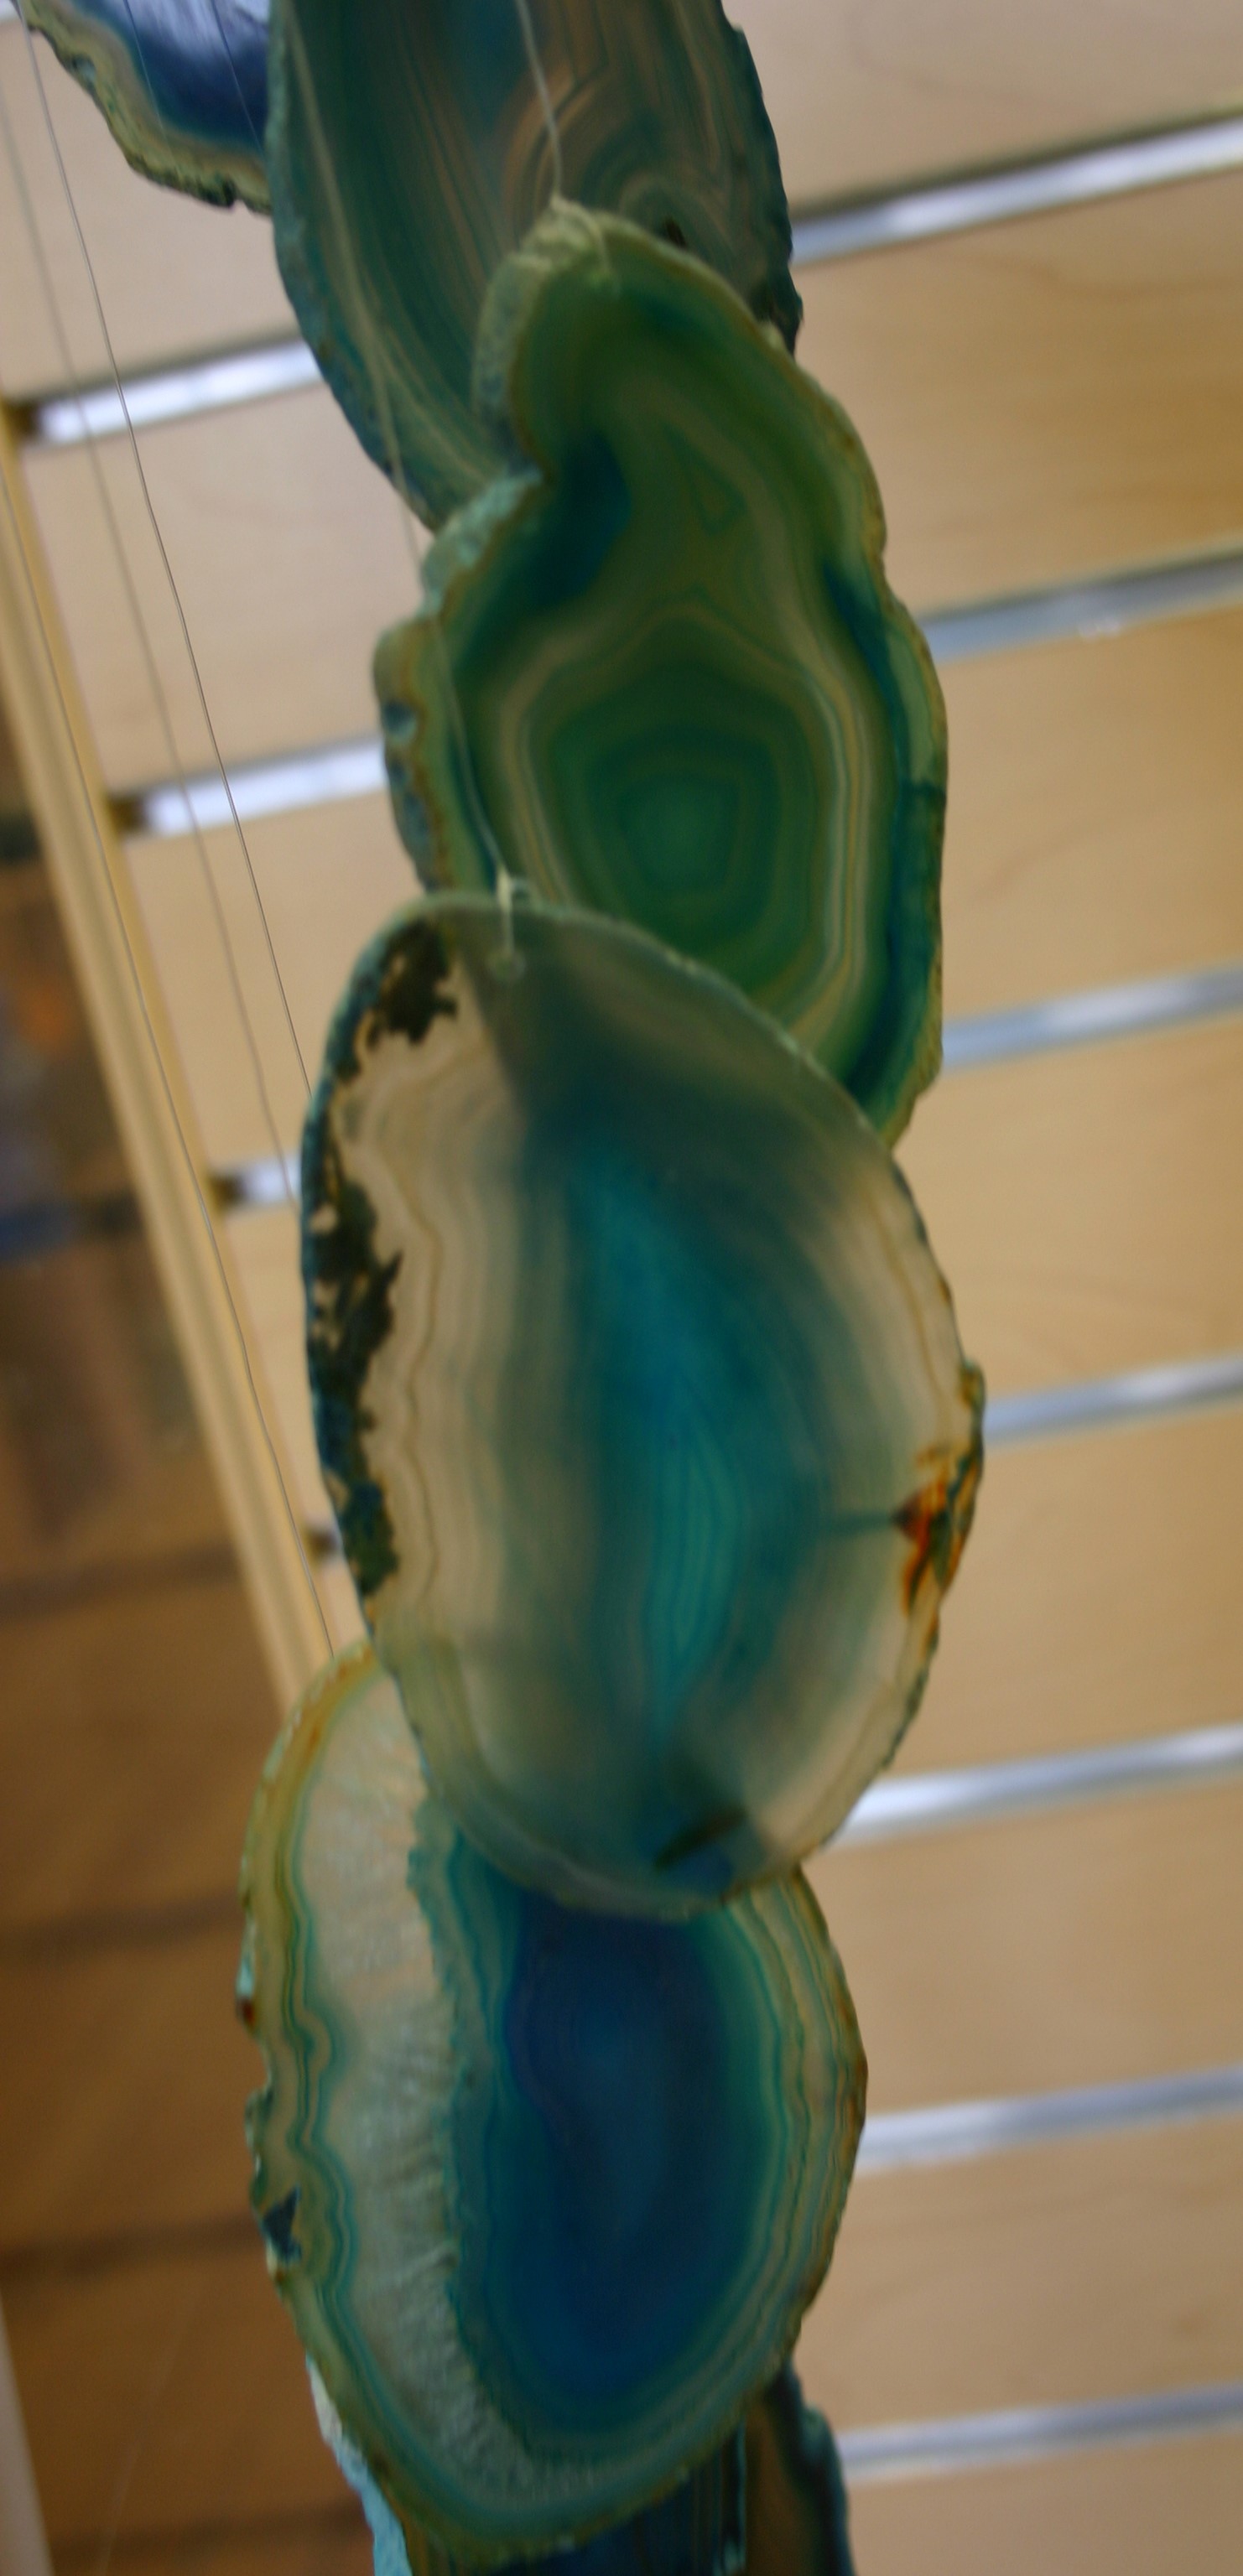 Wind Chime - Natural Agate Chimes in Turquoise - 7 Agate Slivers